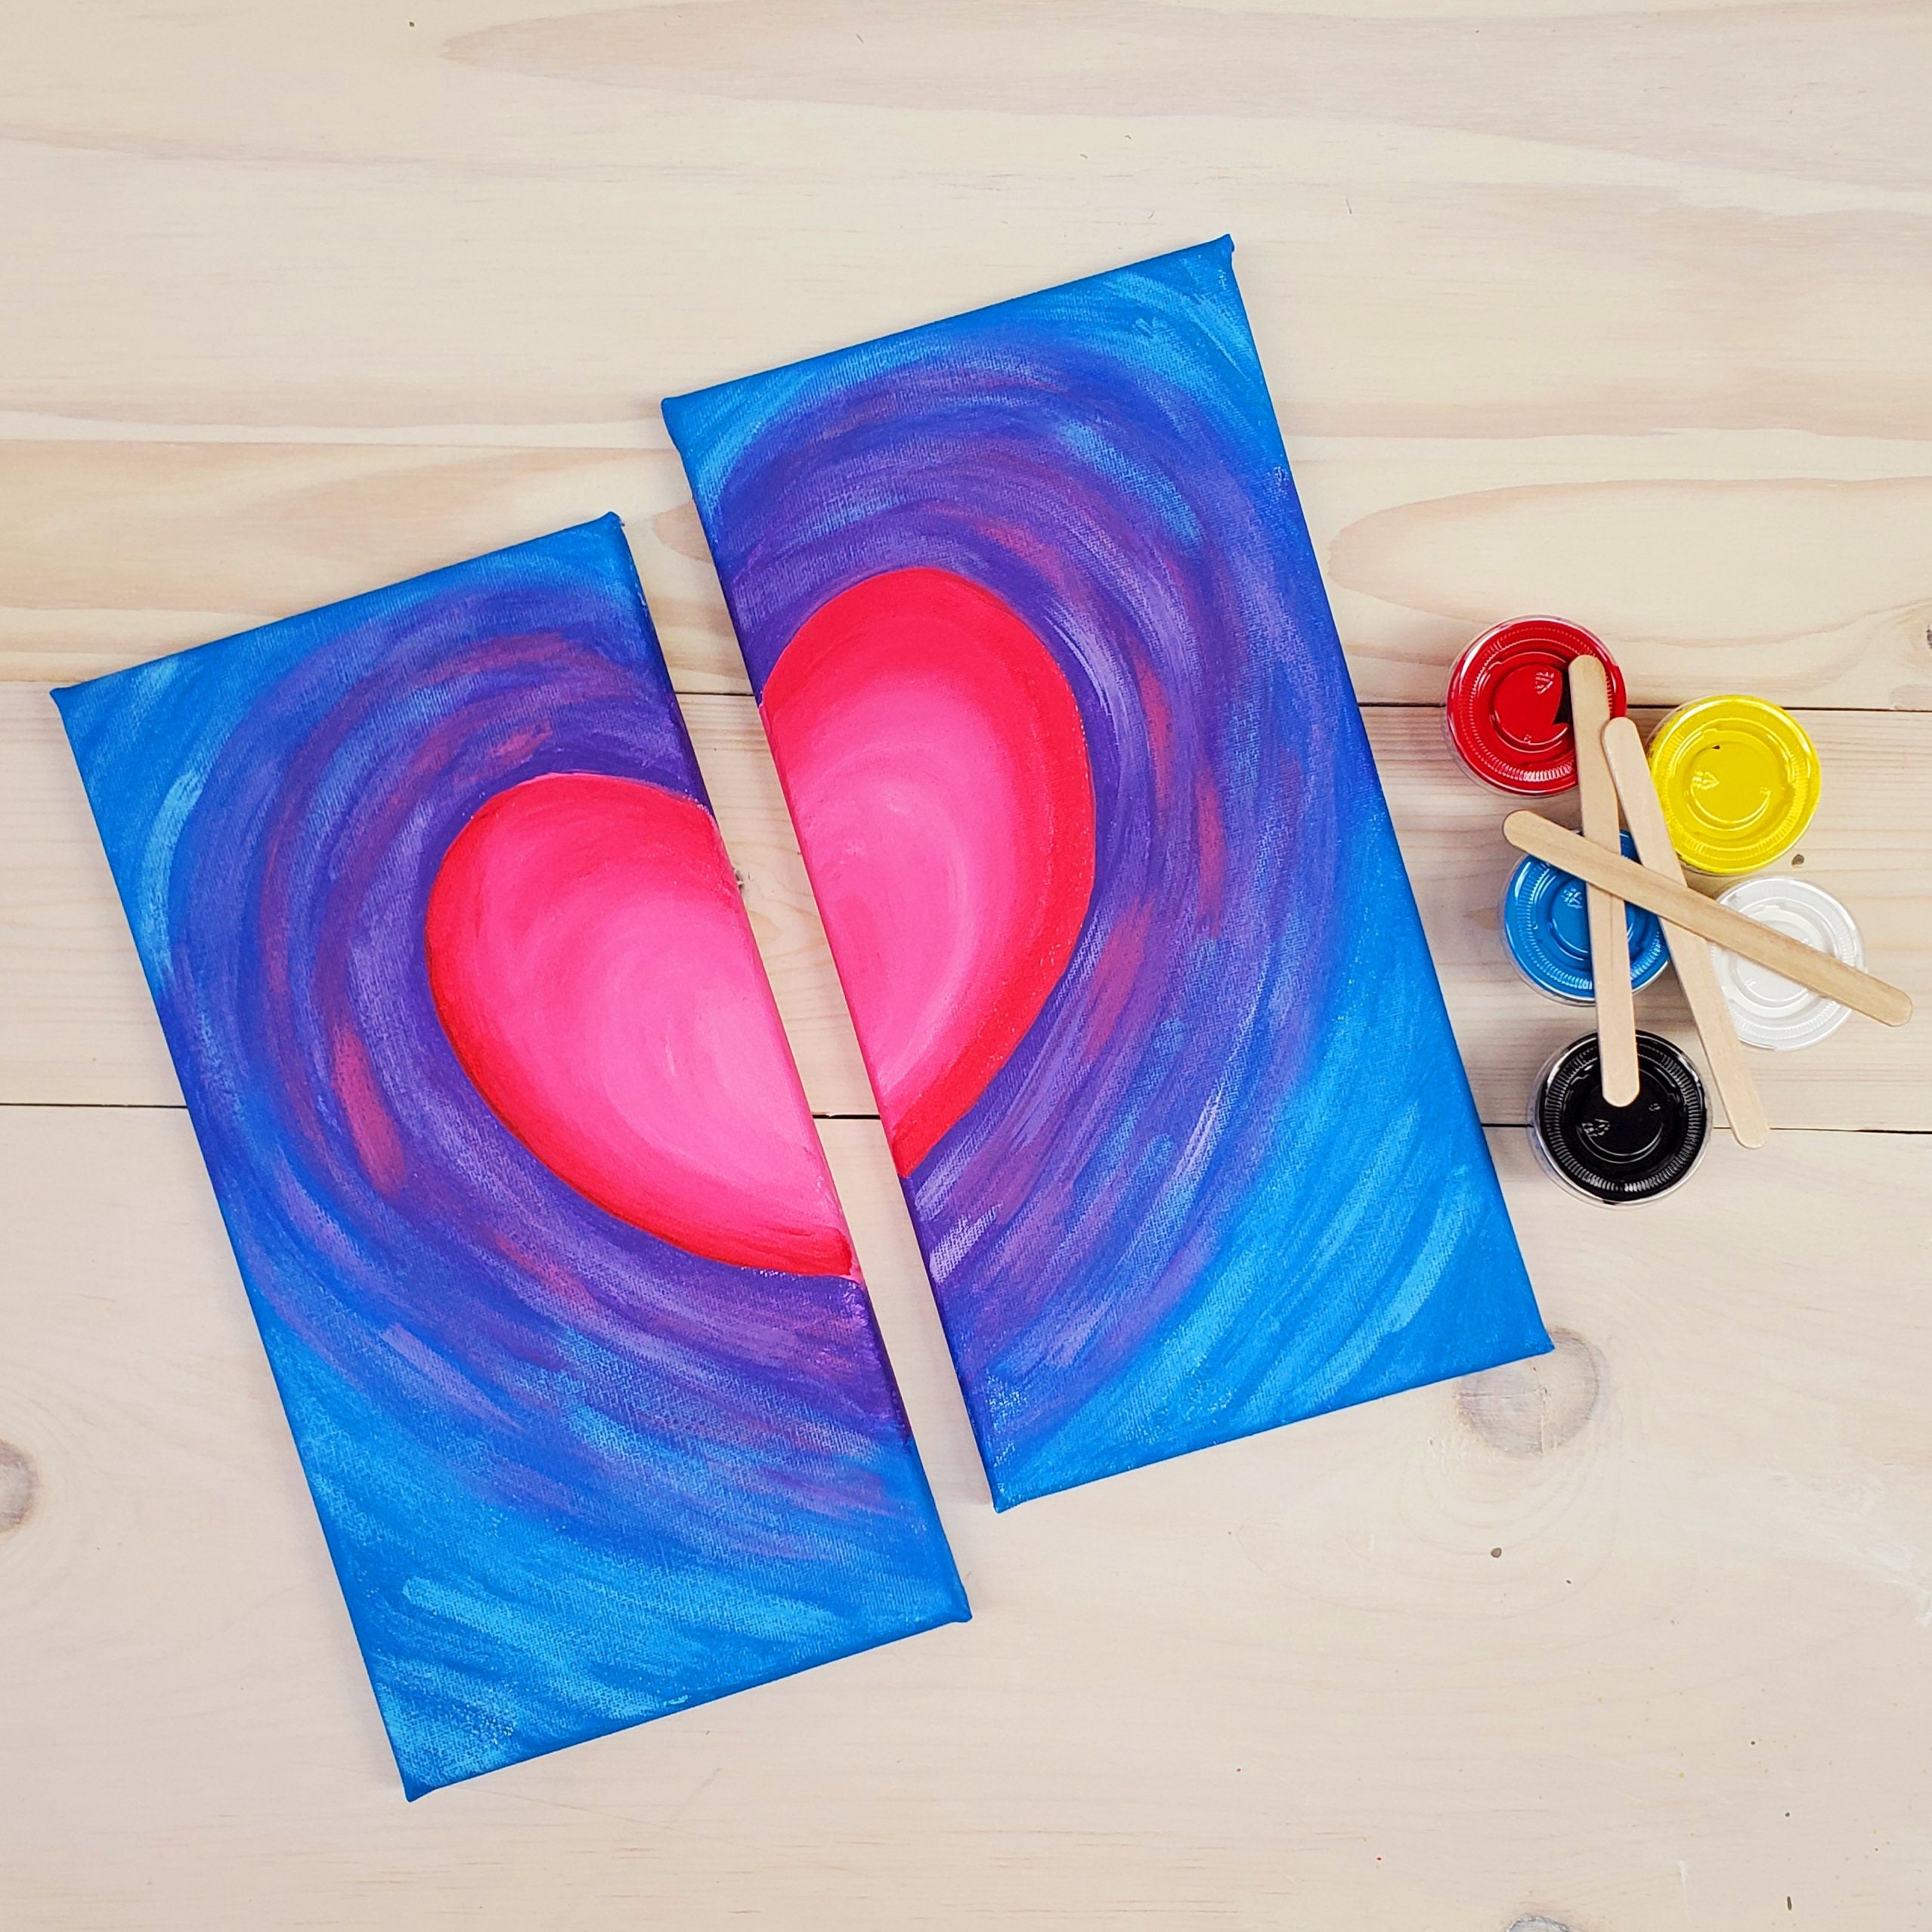 DIY Kiss Me Sign Kit - Valentine's Day Paint Party Kits – Celebrating  Together